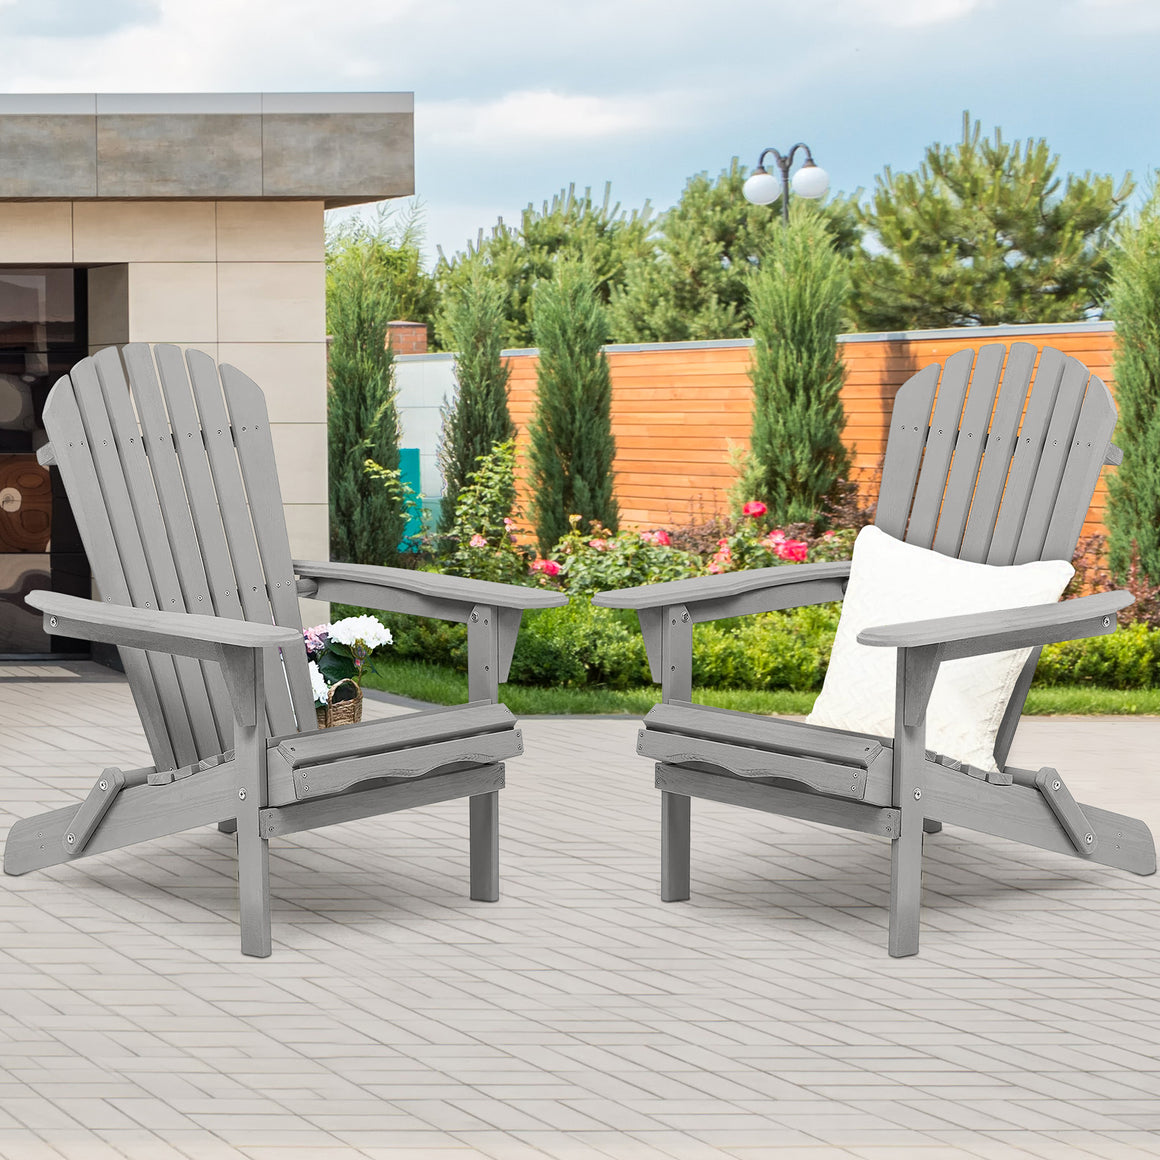 uhomepro Outdoor Adirondack Chairs Set of 2, Folding Fire Pit Chair, Weather Resistant Patio Lawn Chair for Outside Deck Garden Backyard Balcony